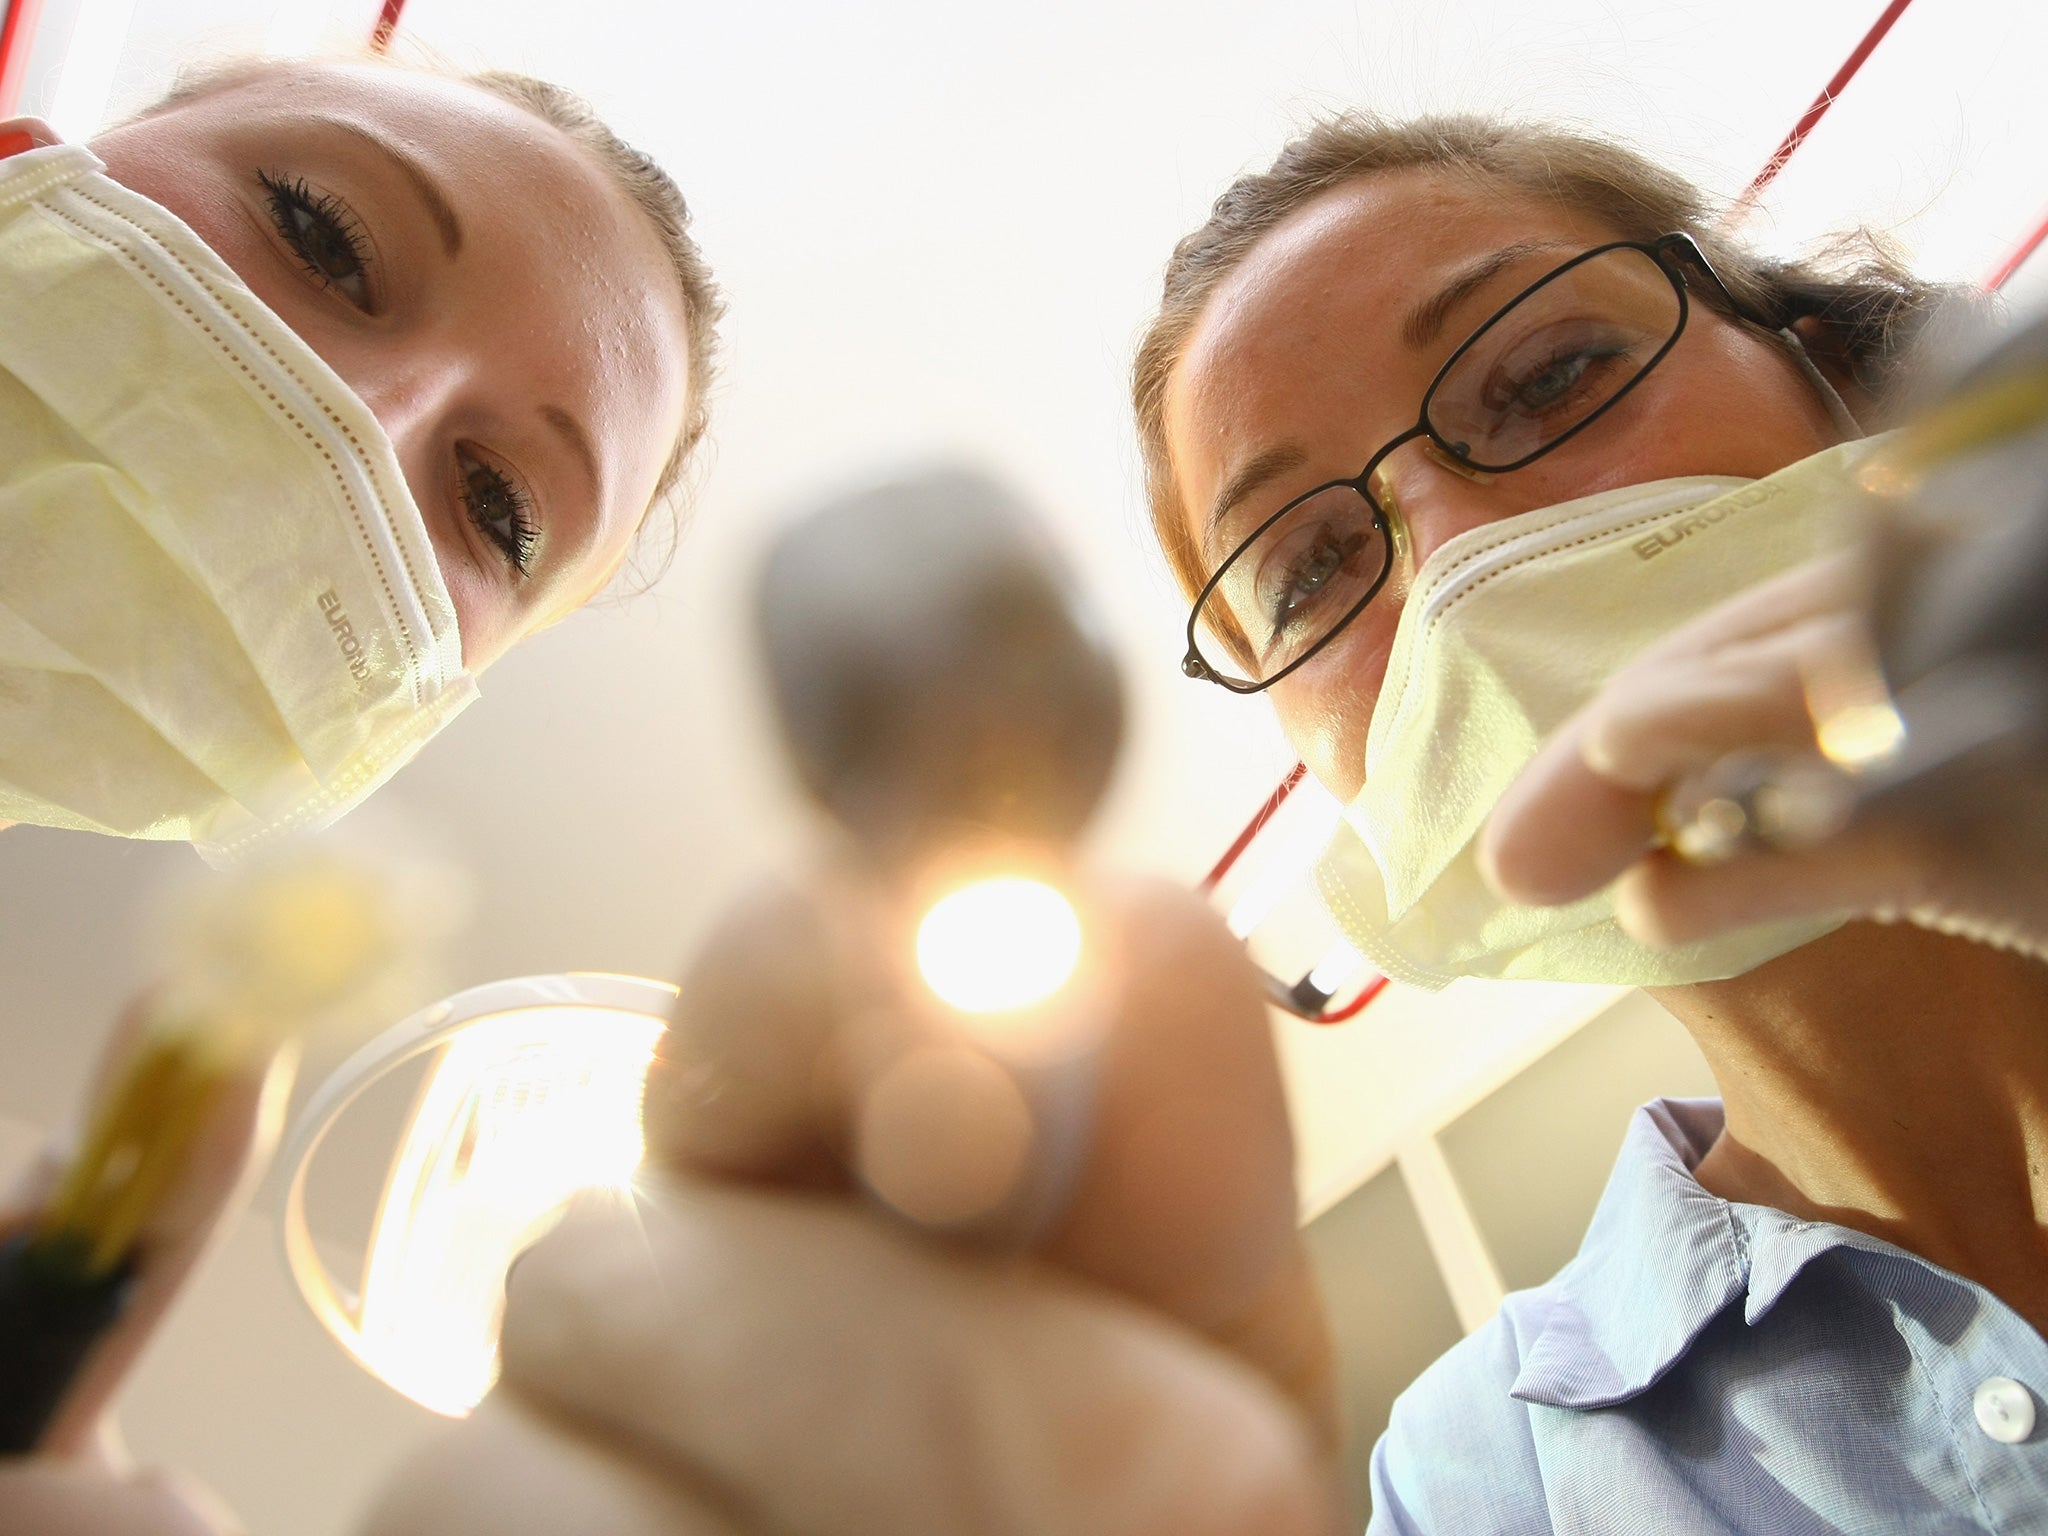 Dentists typically work just over 37 hours per week